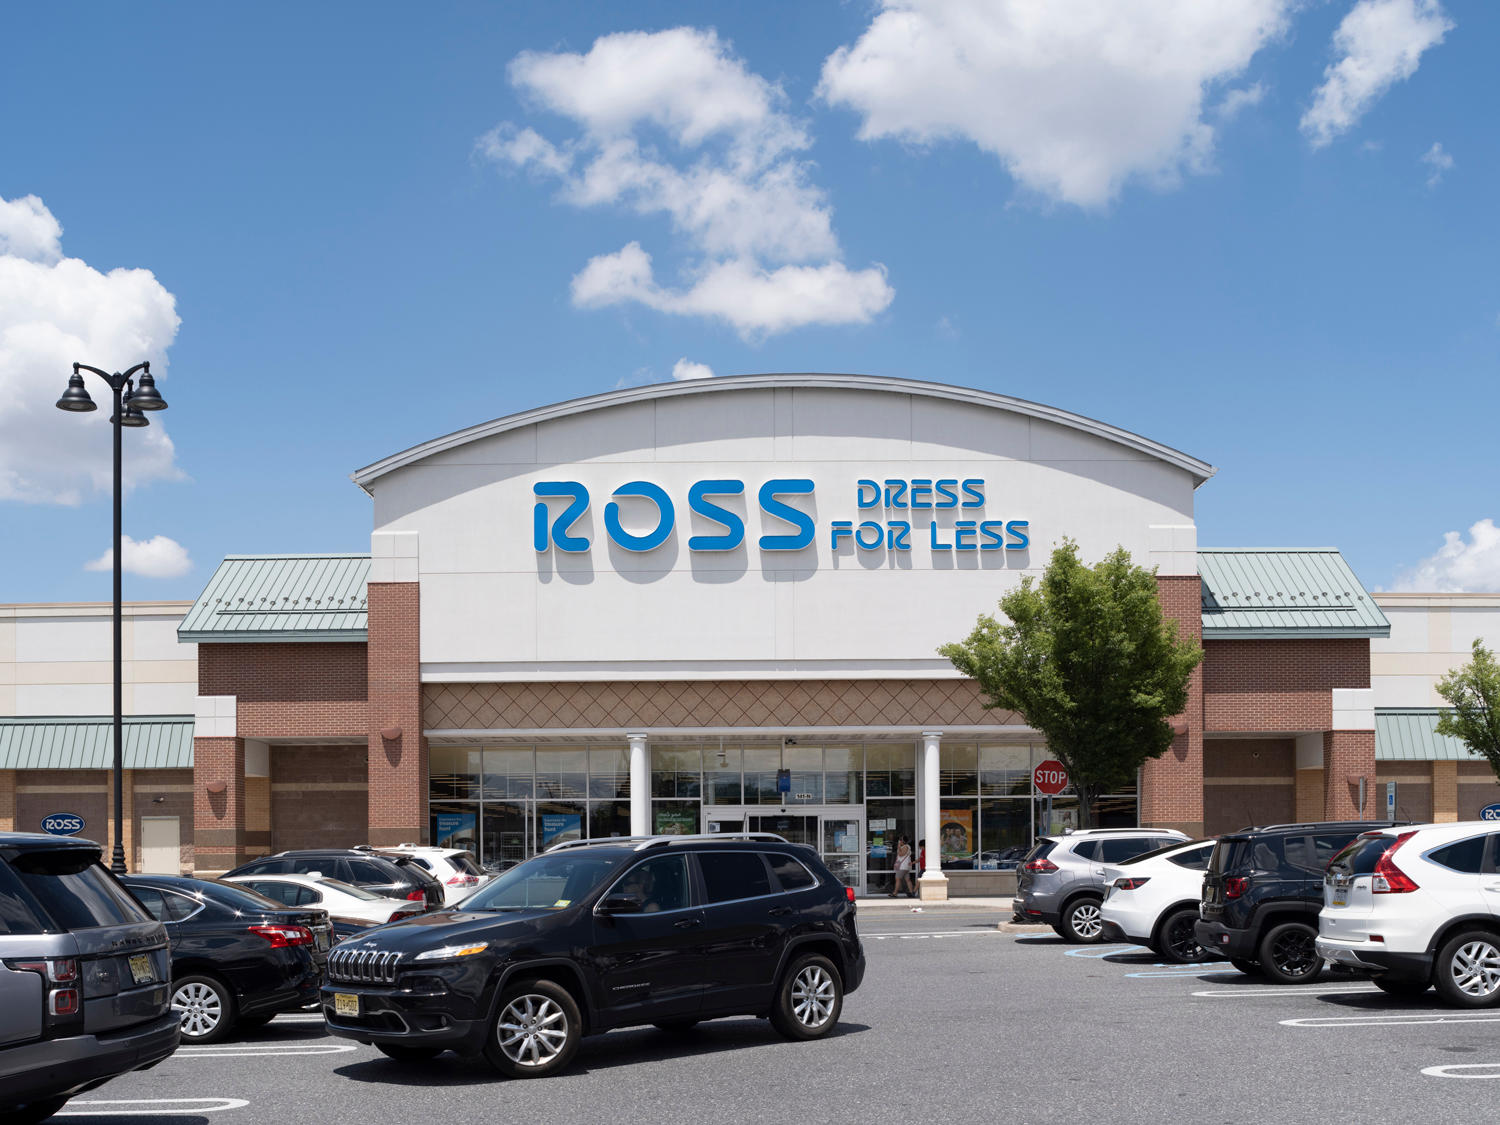 Ross Dress for Less at The Shoppes at Cinnaminson Shopping Center